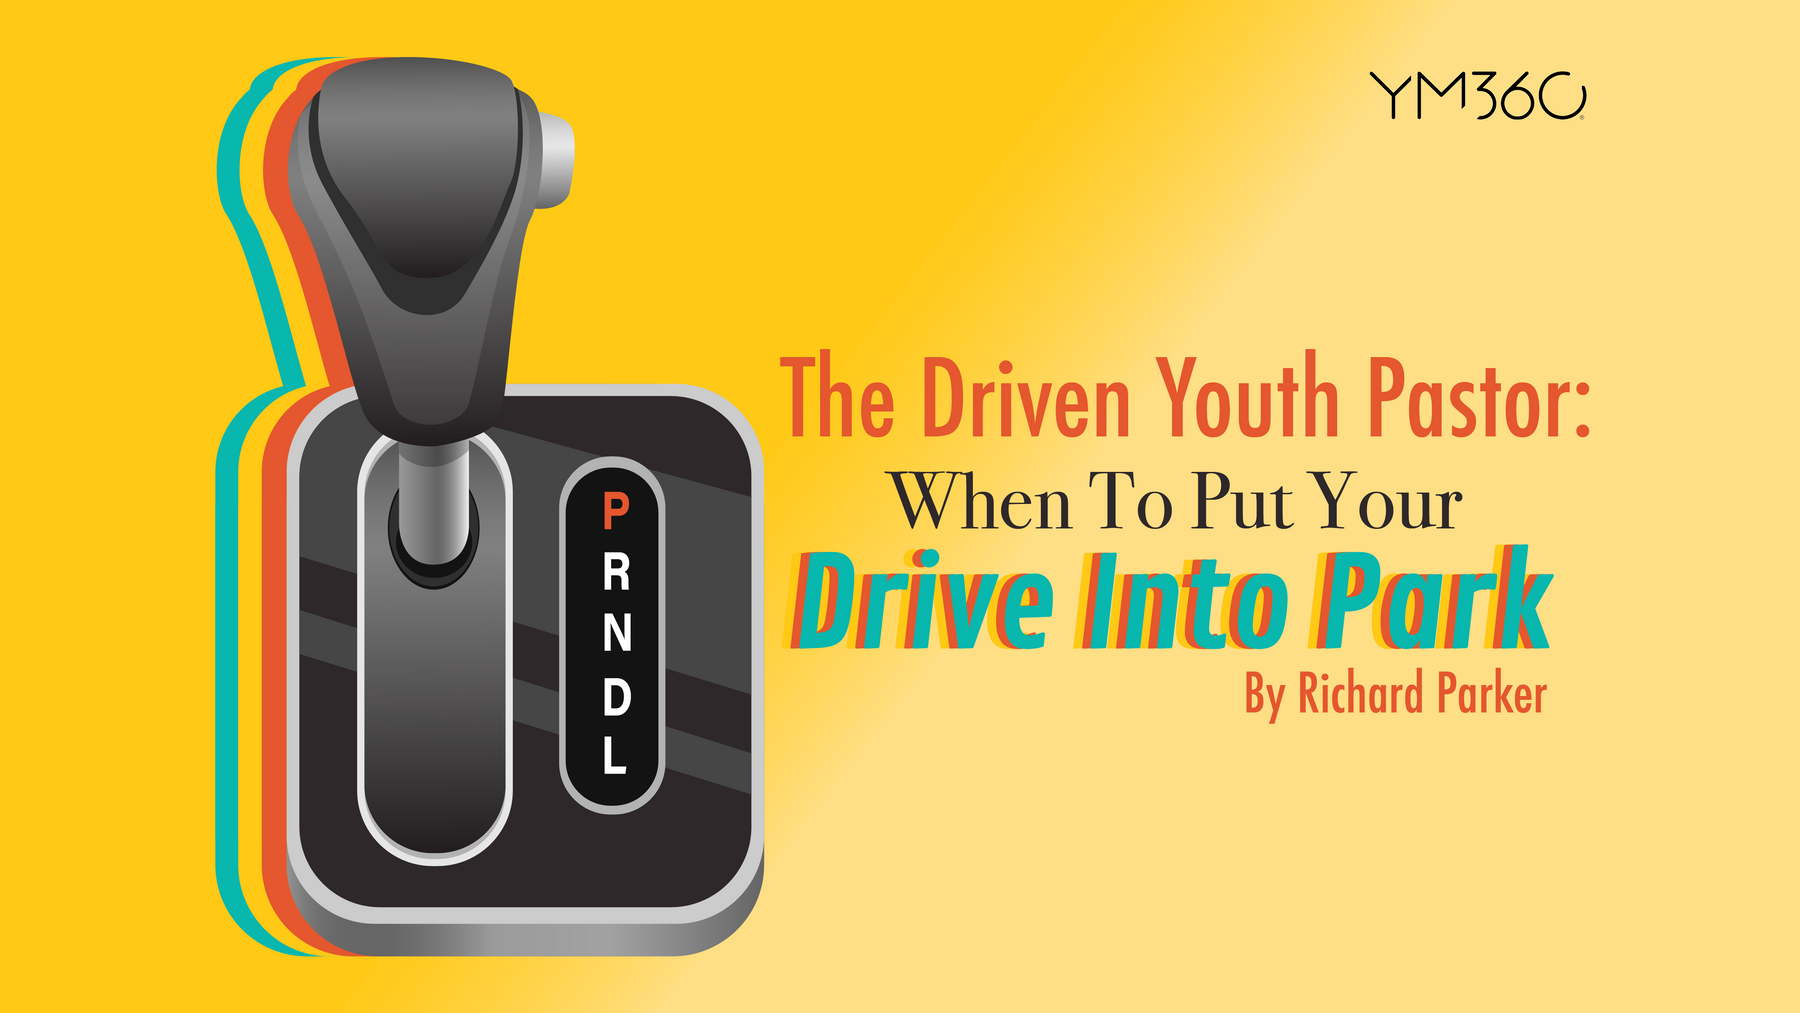 The Driven Youth Pastor: When To Put Your Drive Into Park